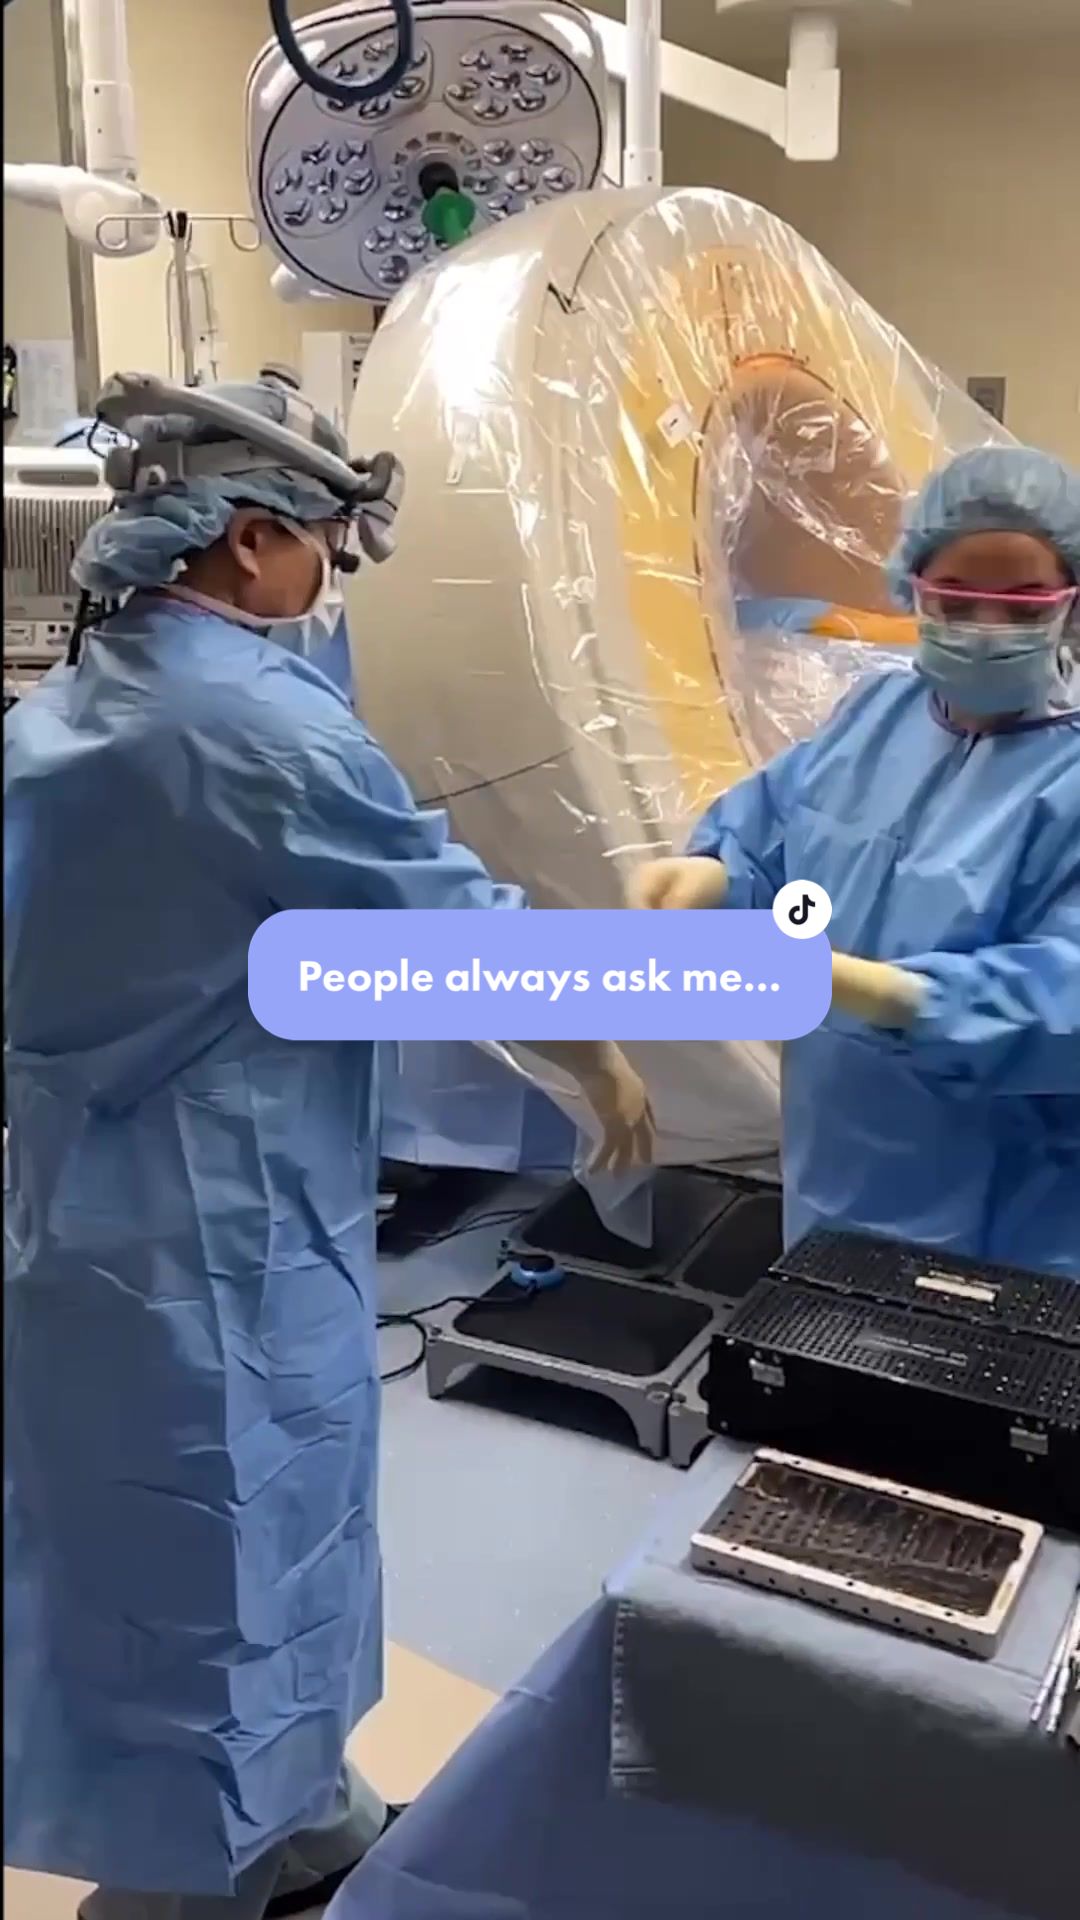 People always ask me… . . #spine #spinesurgery #spinedoctor #germs #peoplealwaysaskme #expert #healthcare #medical #sandiego #minimallyinvasivesurgery #fusion ##medicalstudent #physicianassistant #xraytech  #neurophysiologist #nurse #orthopedics #neurophysiologist #hospital #backpain #neckpain  created by Dr. Choll Kim with Dr. Choll Kim's original sound